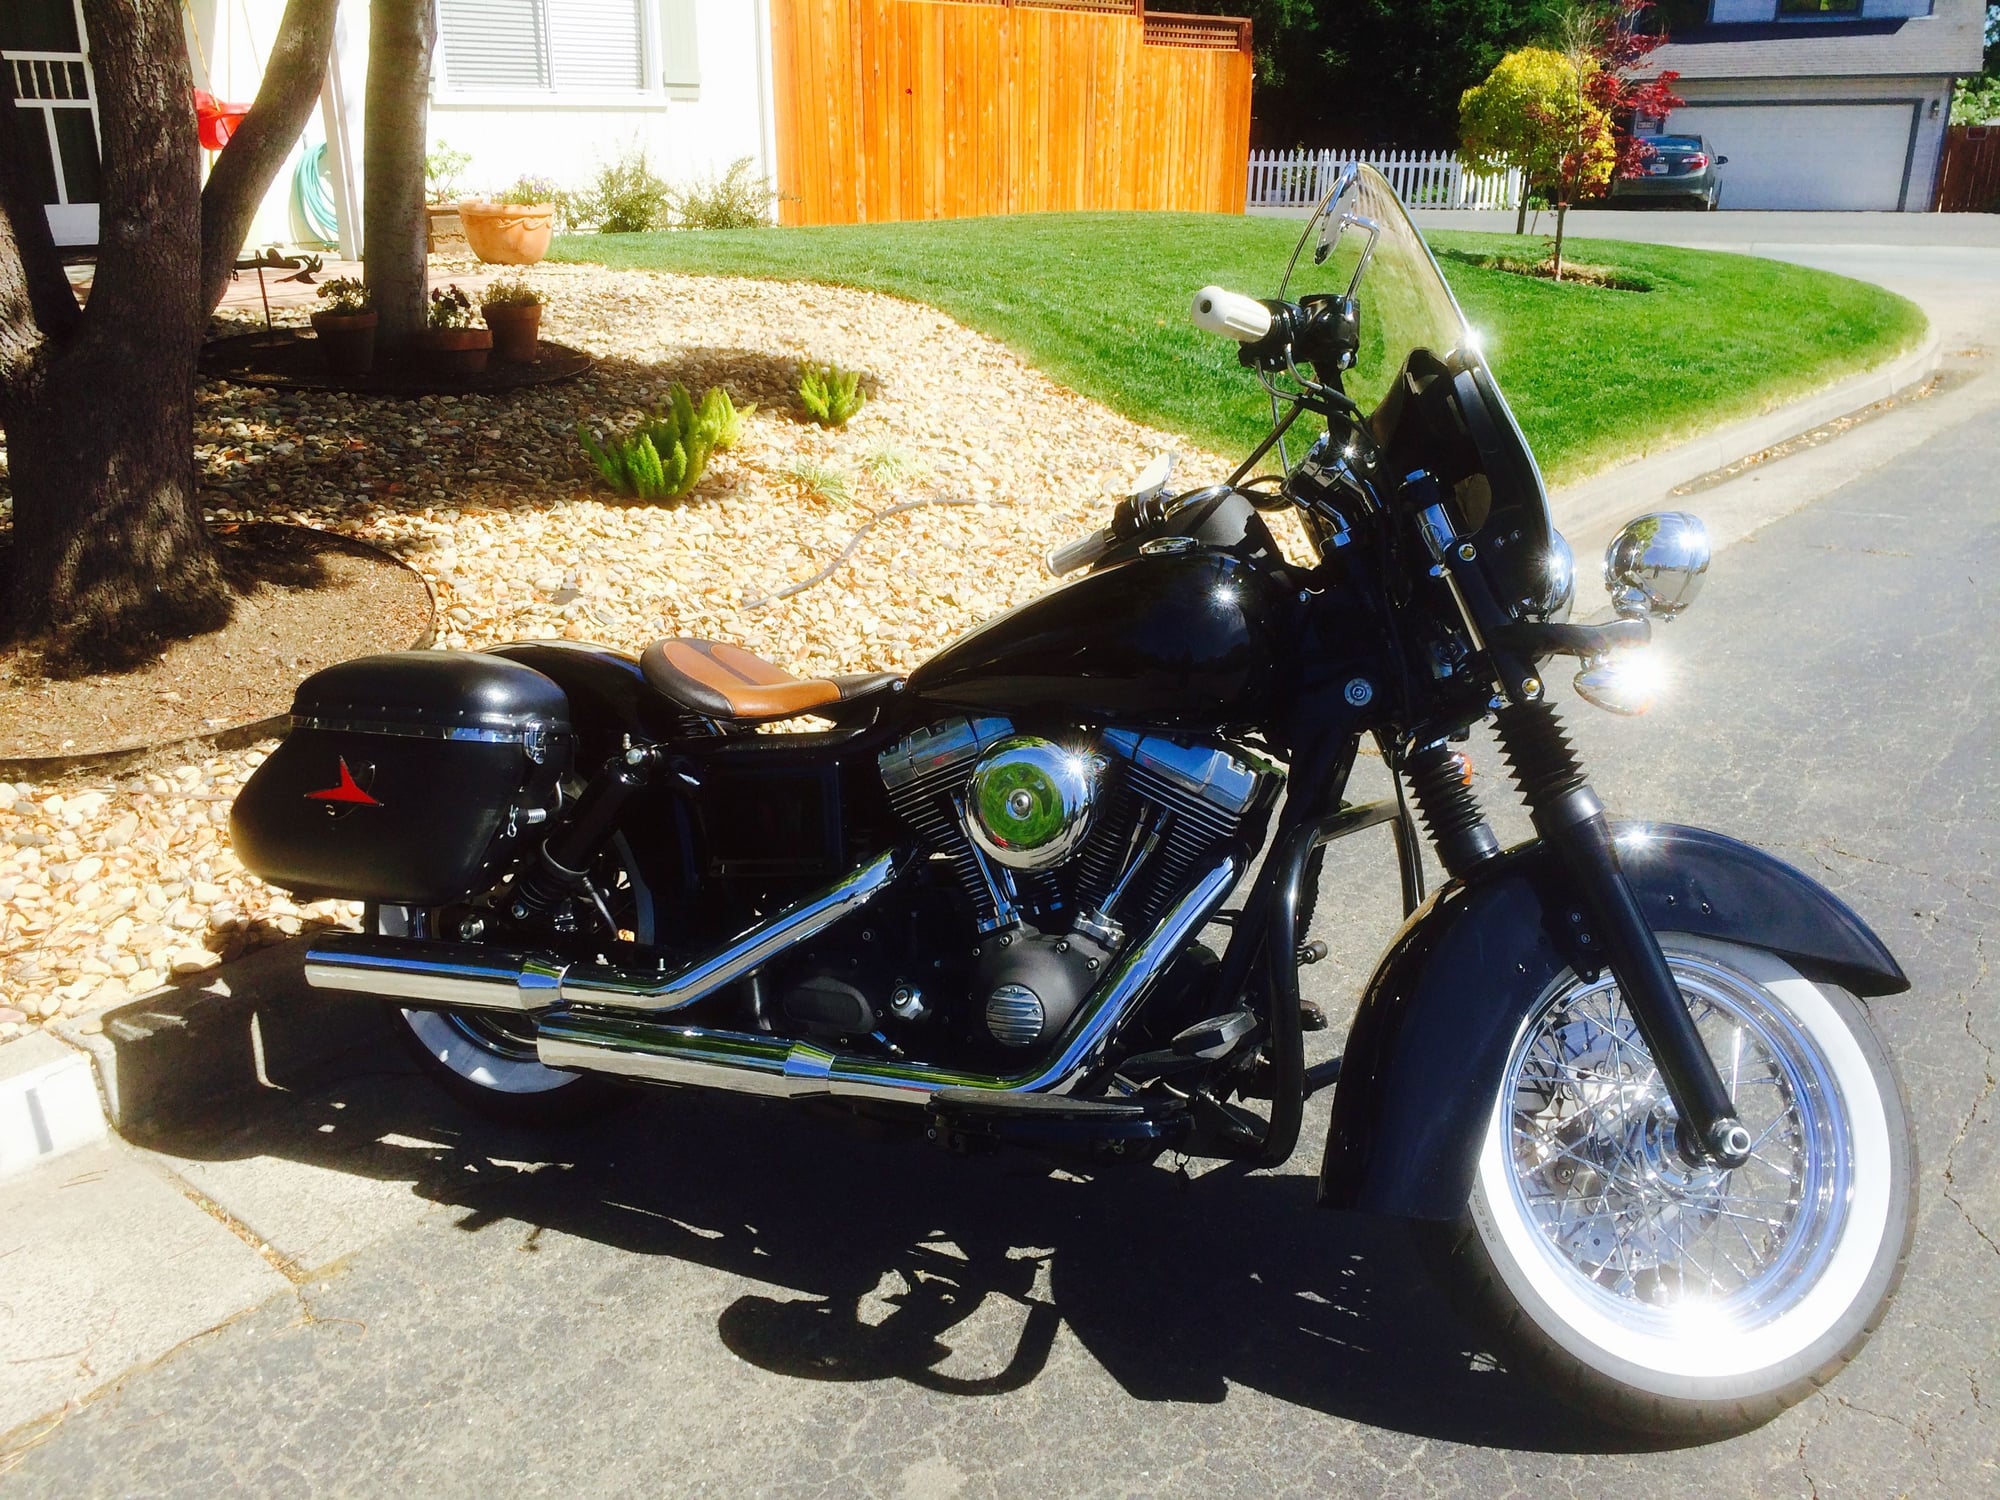 Let's see your Switchback - Page 2 - Harley Davidson Forums